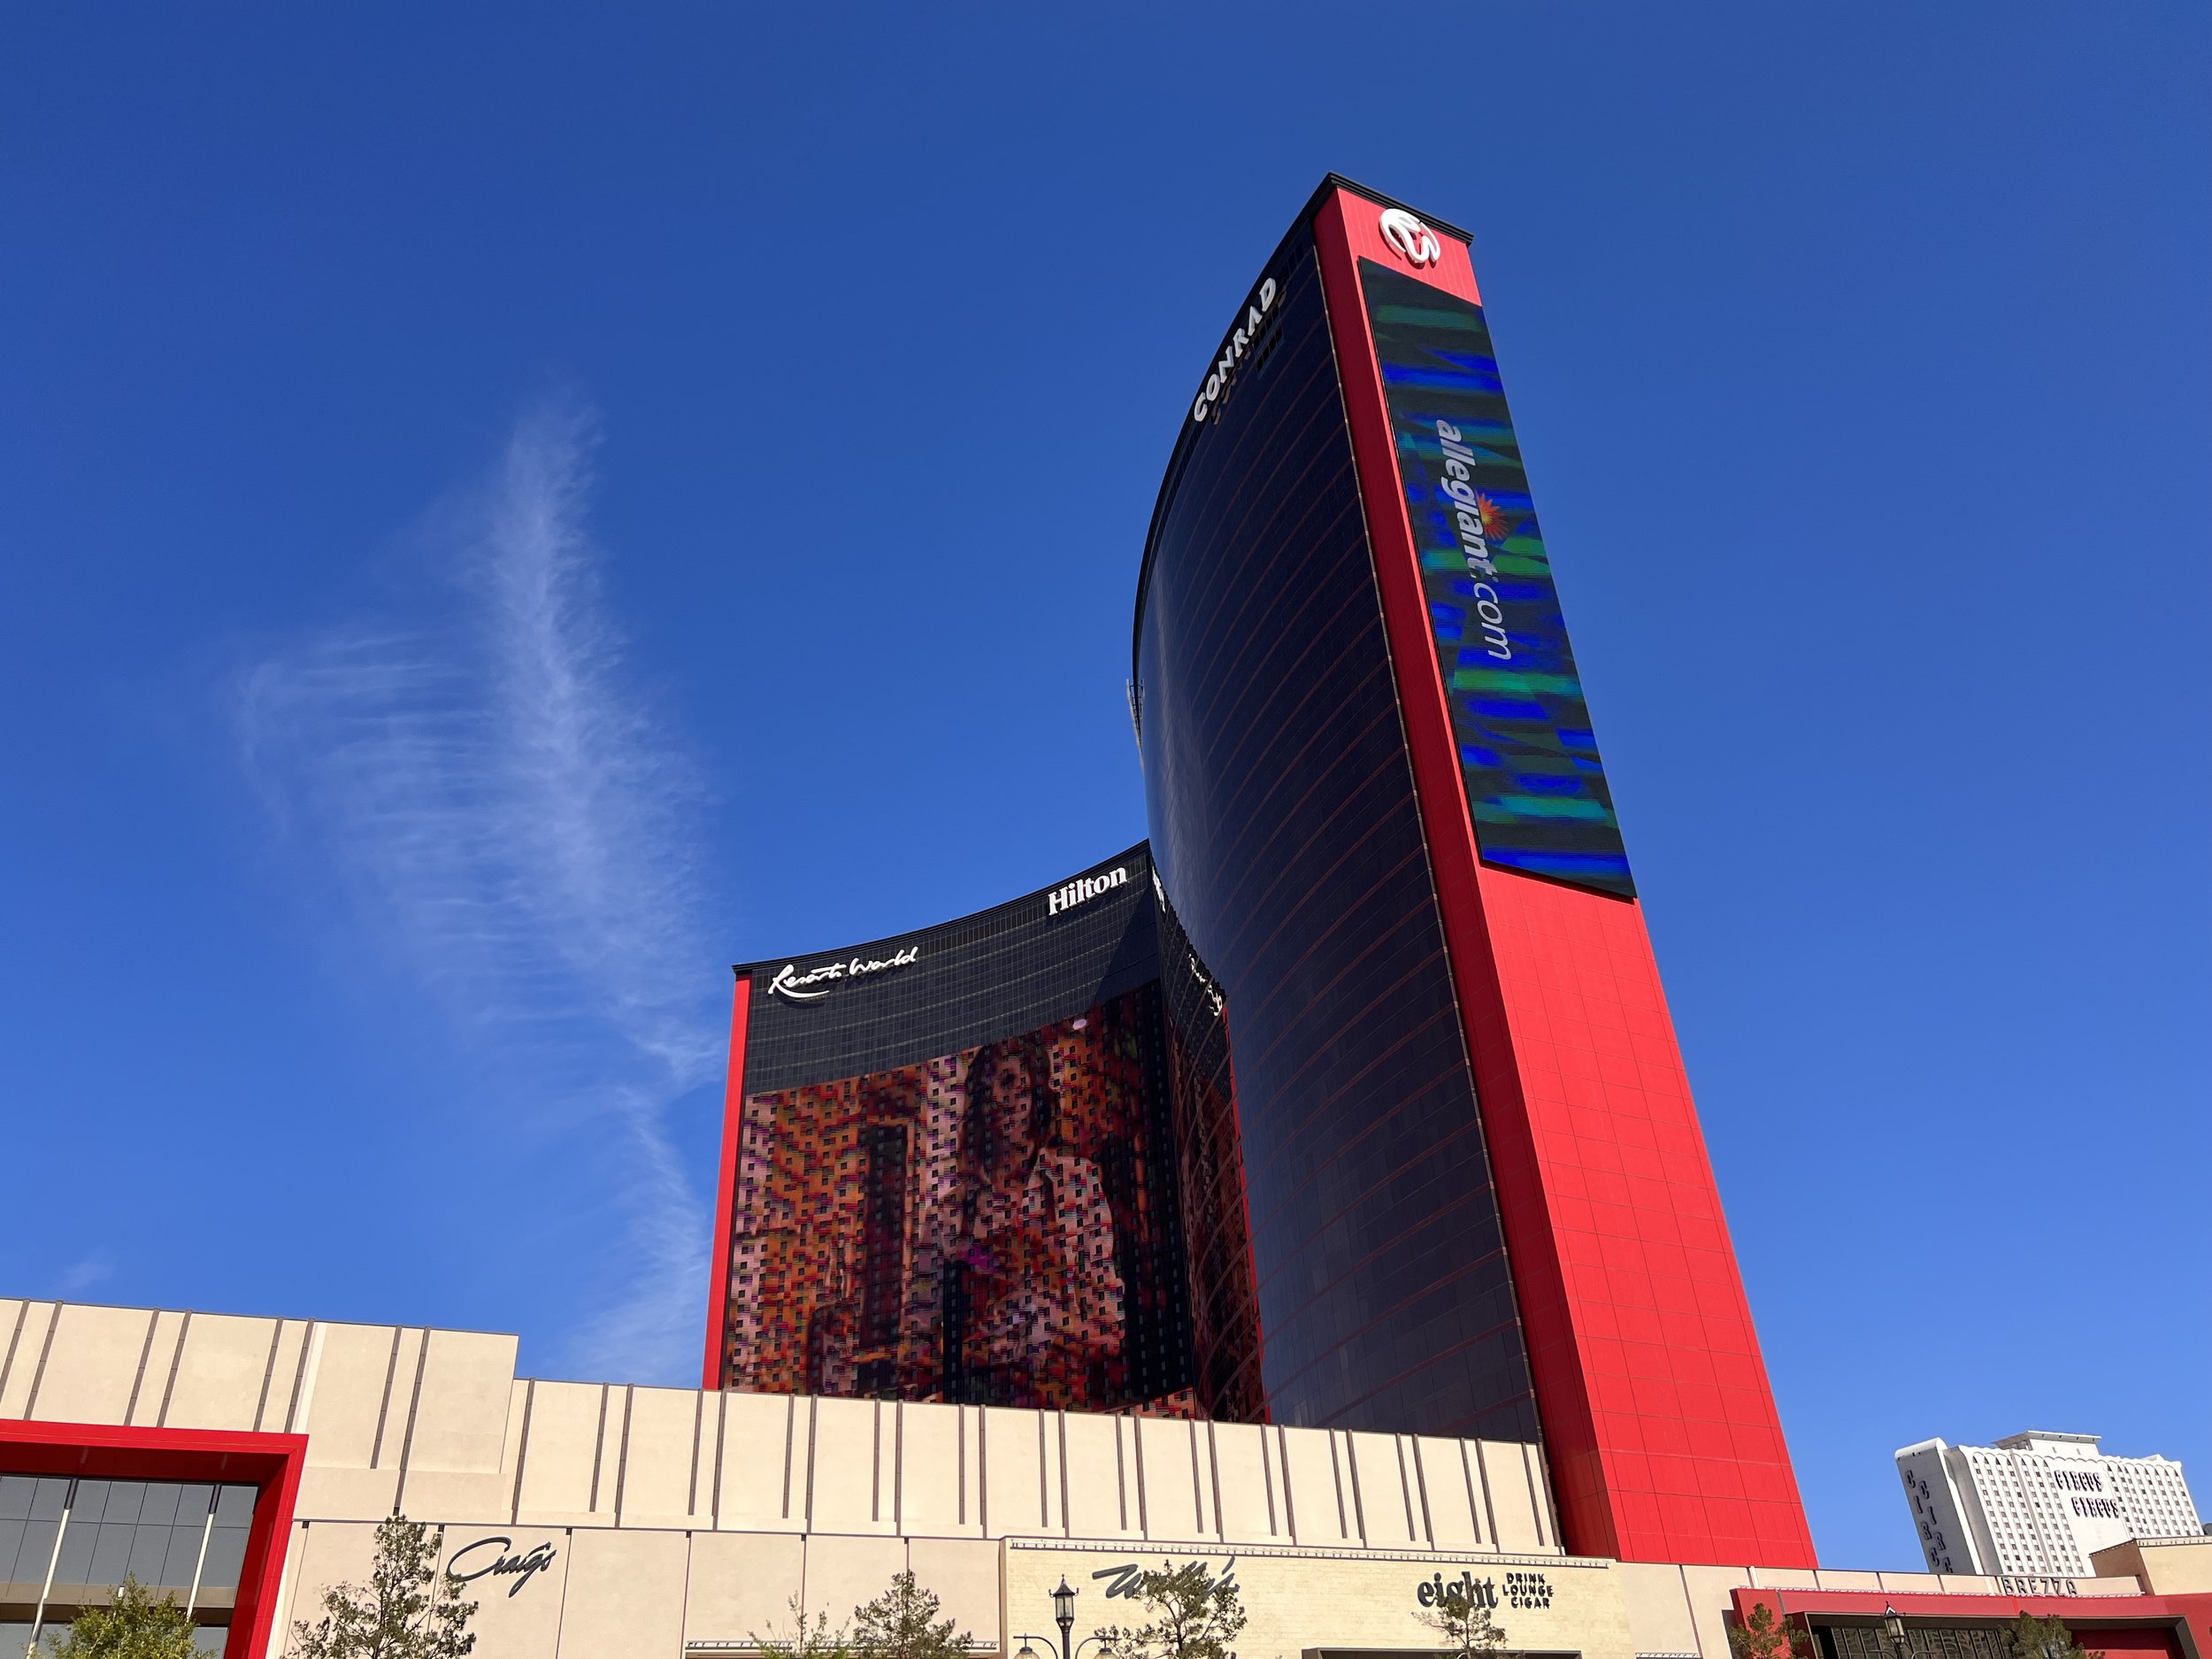 Best Hotels on Las Vegas Strip: Resorts, Reviews, Photos, and